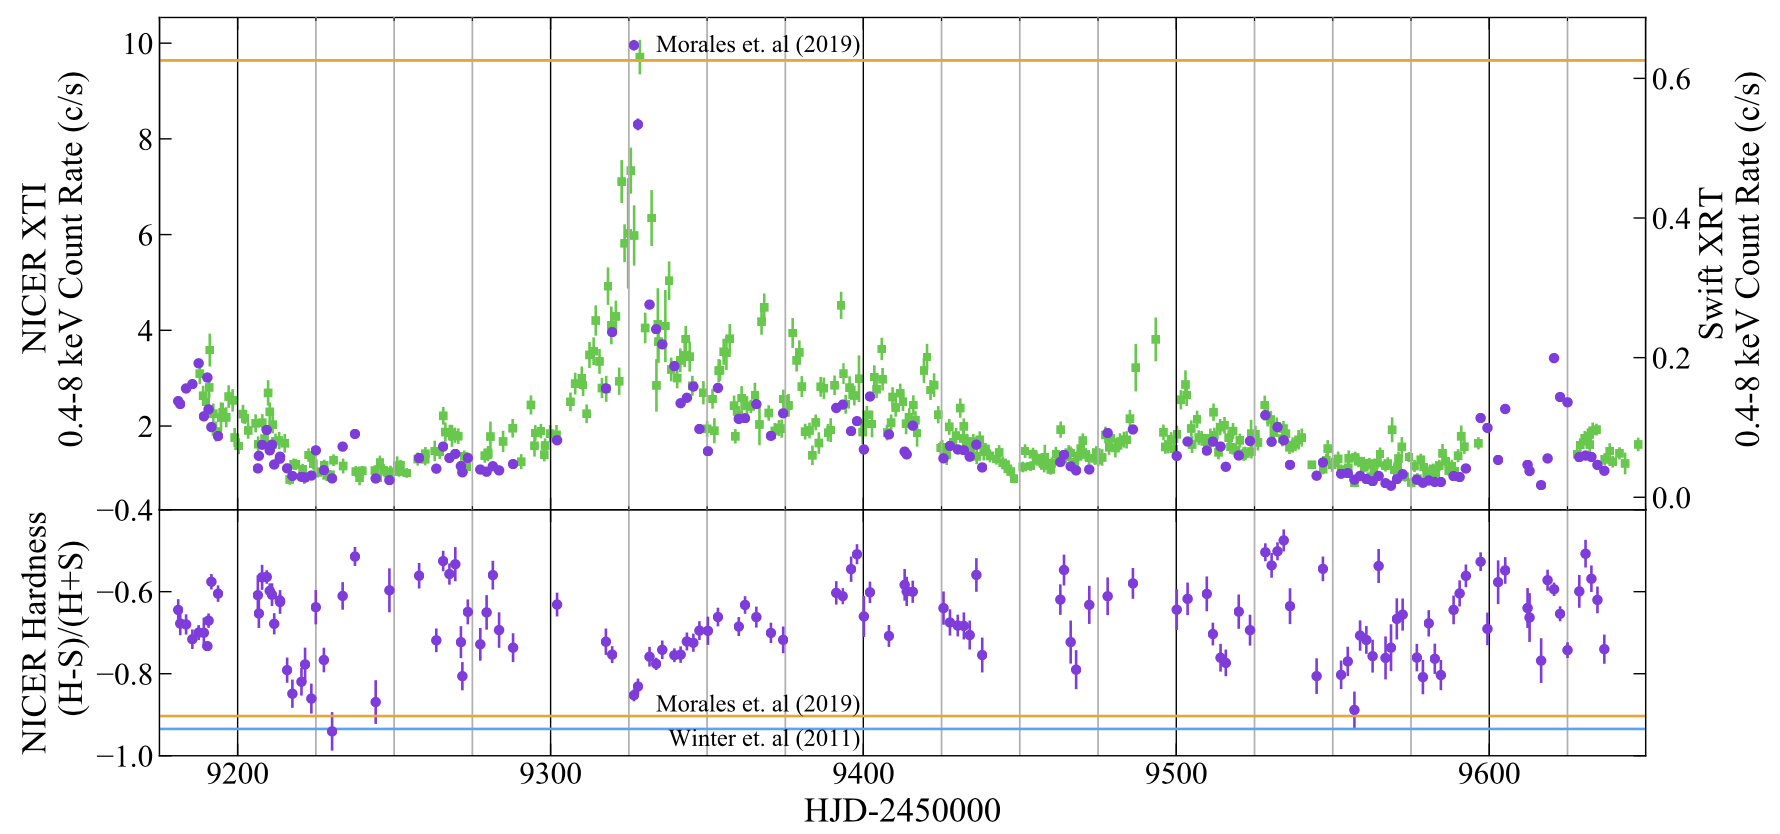 Purple points (error bars are often smaller than the plotted circles) represent NICER measurements of the photon count-rate (upper panel) and hardness ratio of high-energy to low-energy photon detections (lower panel) for Mrk 817, from November 2020 to February 2022 (dates shown in Heliocentric Julian Day, or HJD). The green points represent measurements made with the X-ray Telescope (XRT) onboard NASA's Swift observatory; the low Swift countrates preclude spectral measurements such as the hardness ratio. The orange horizontal lines (9.6 counts/sec in the upper panel) reflect measurements made in 2019, while the blue horizontal line shows a hardness-ratio measurement from 2011; the 2011 count-rate measurement, at 18.7 counts/sec, is off the chart. Figure from Partington et al. 2023